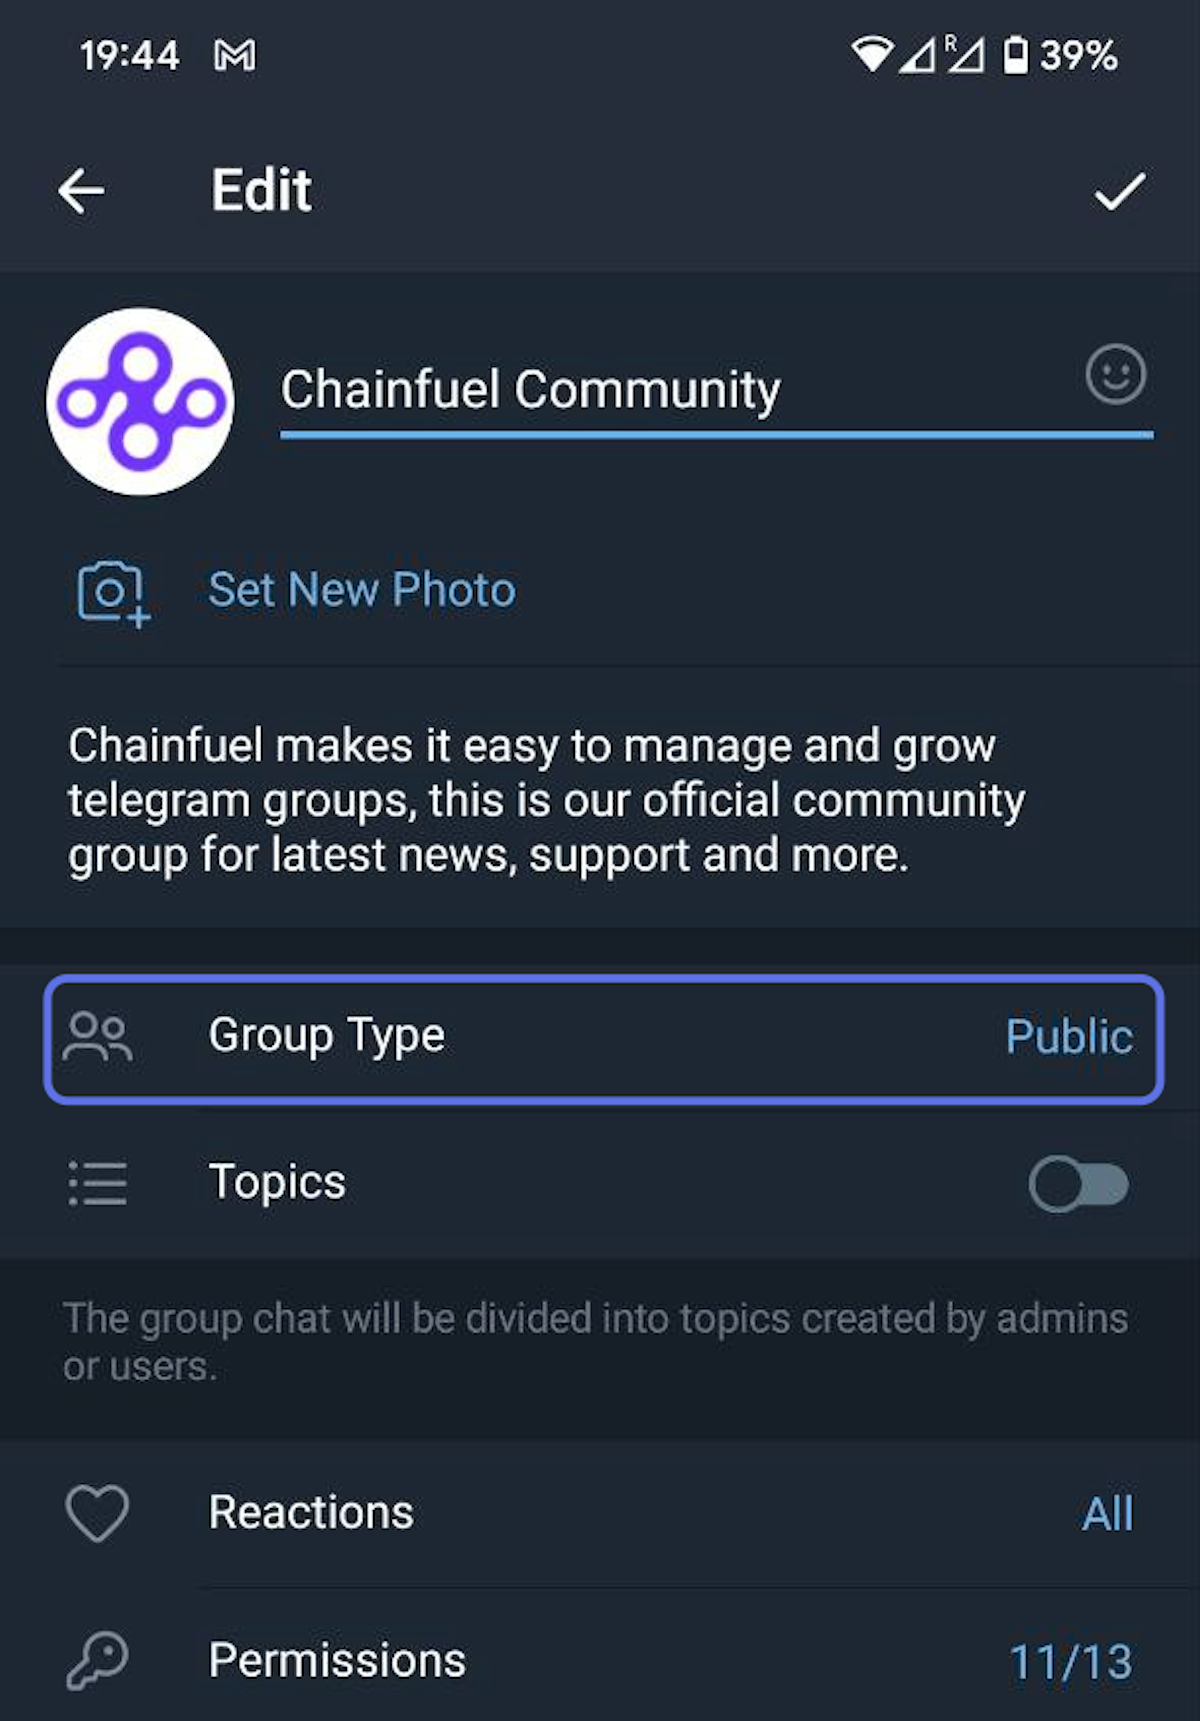 Click on the 'Group Type' menu as shown in the image below